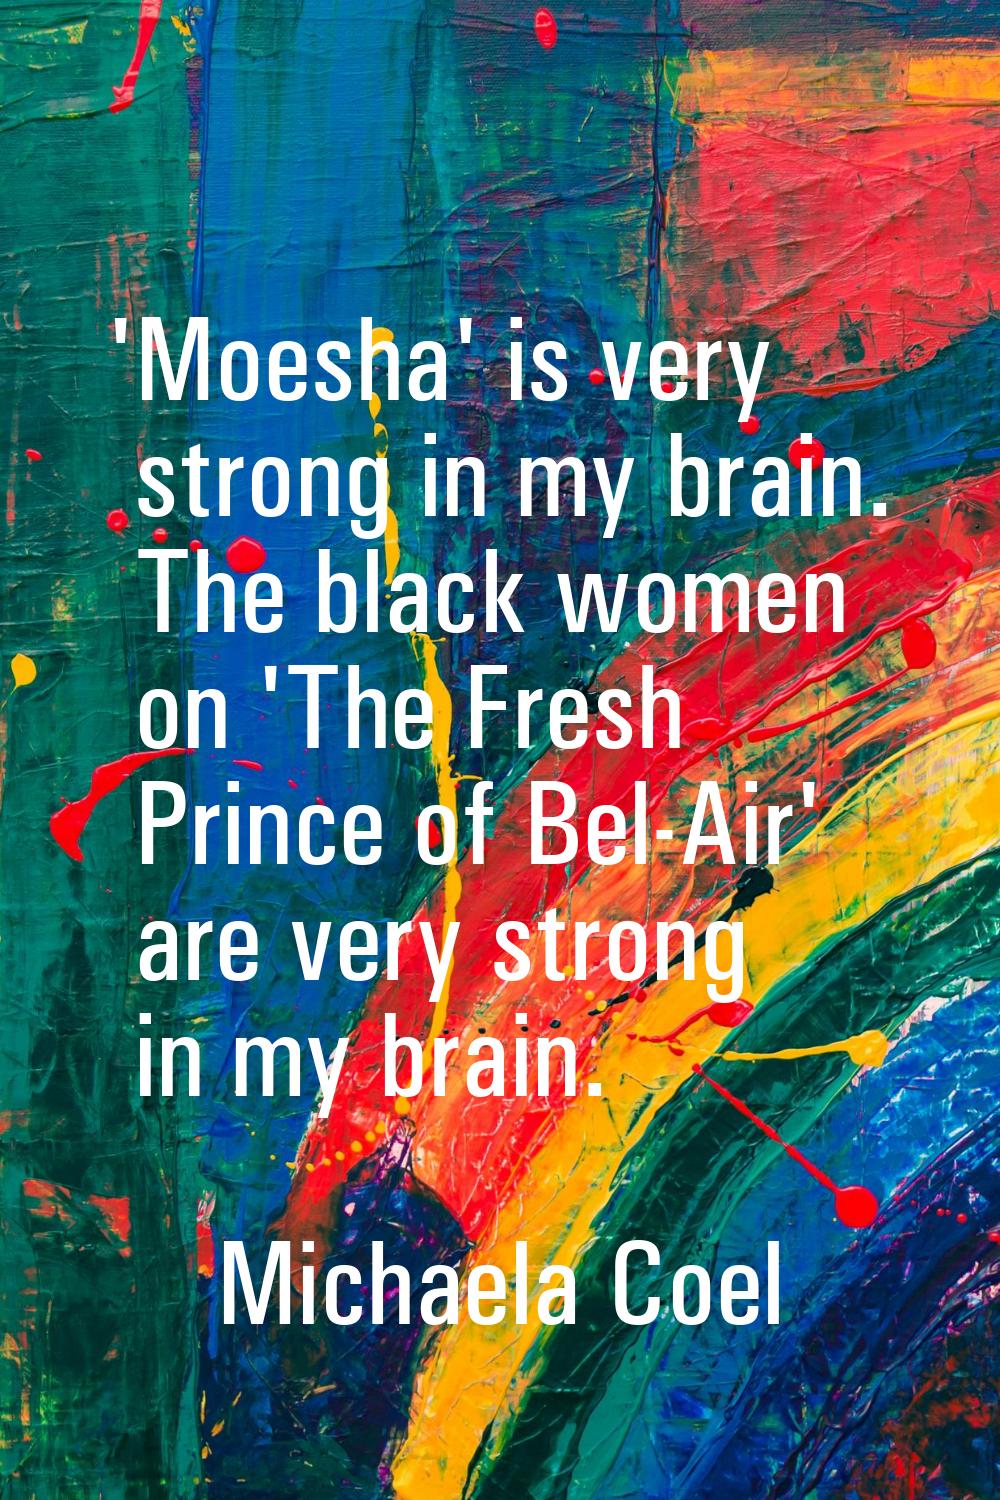 'Moesha' is very strong in my brain. The black women on 'The Fresh Prince of Bel-Air' are very stro